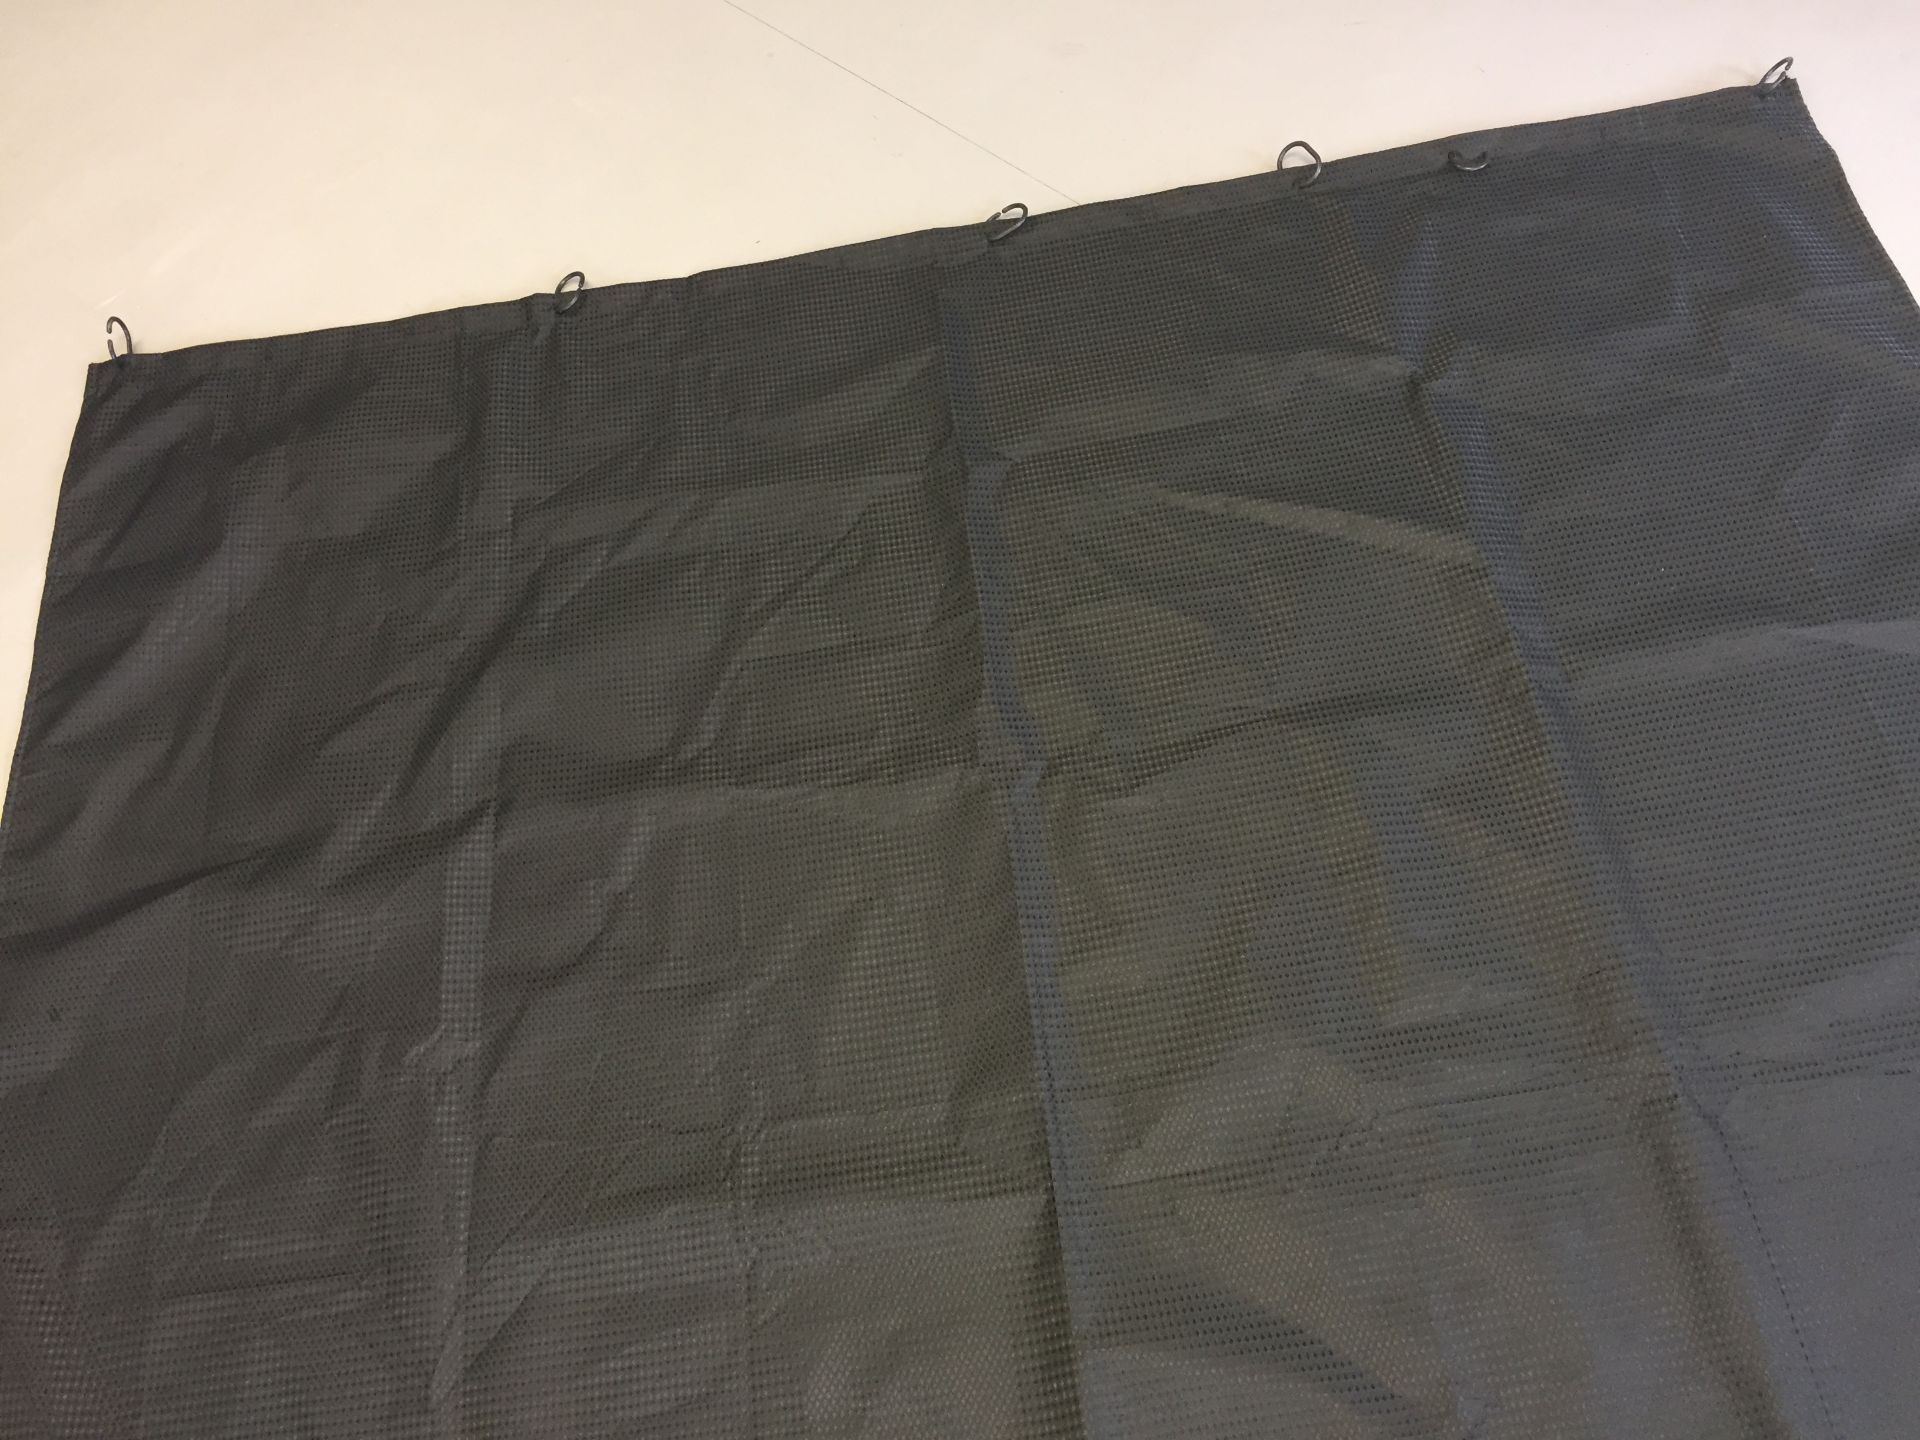 Blackout Curtains (set of 2) - Image 2 of 3